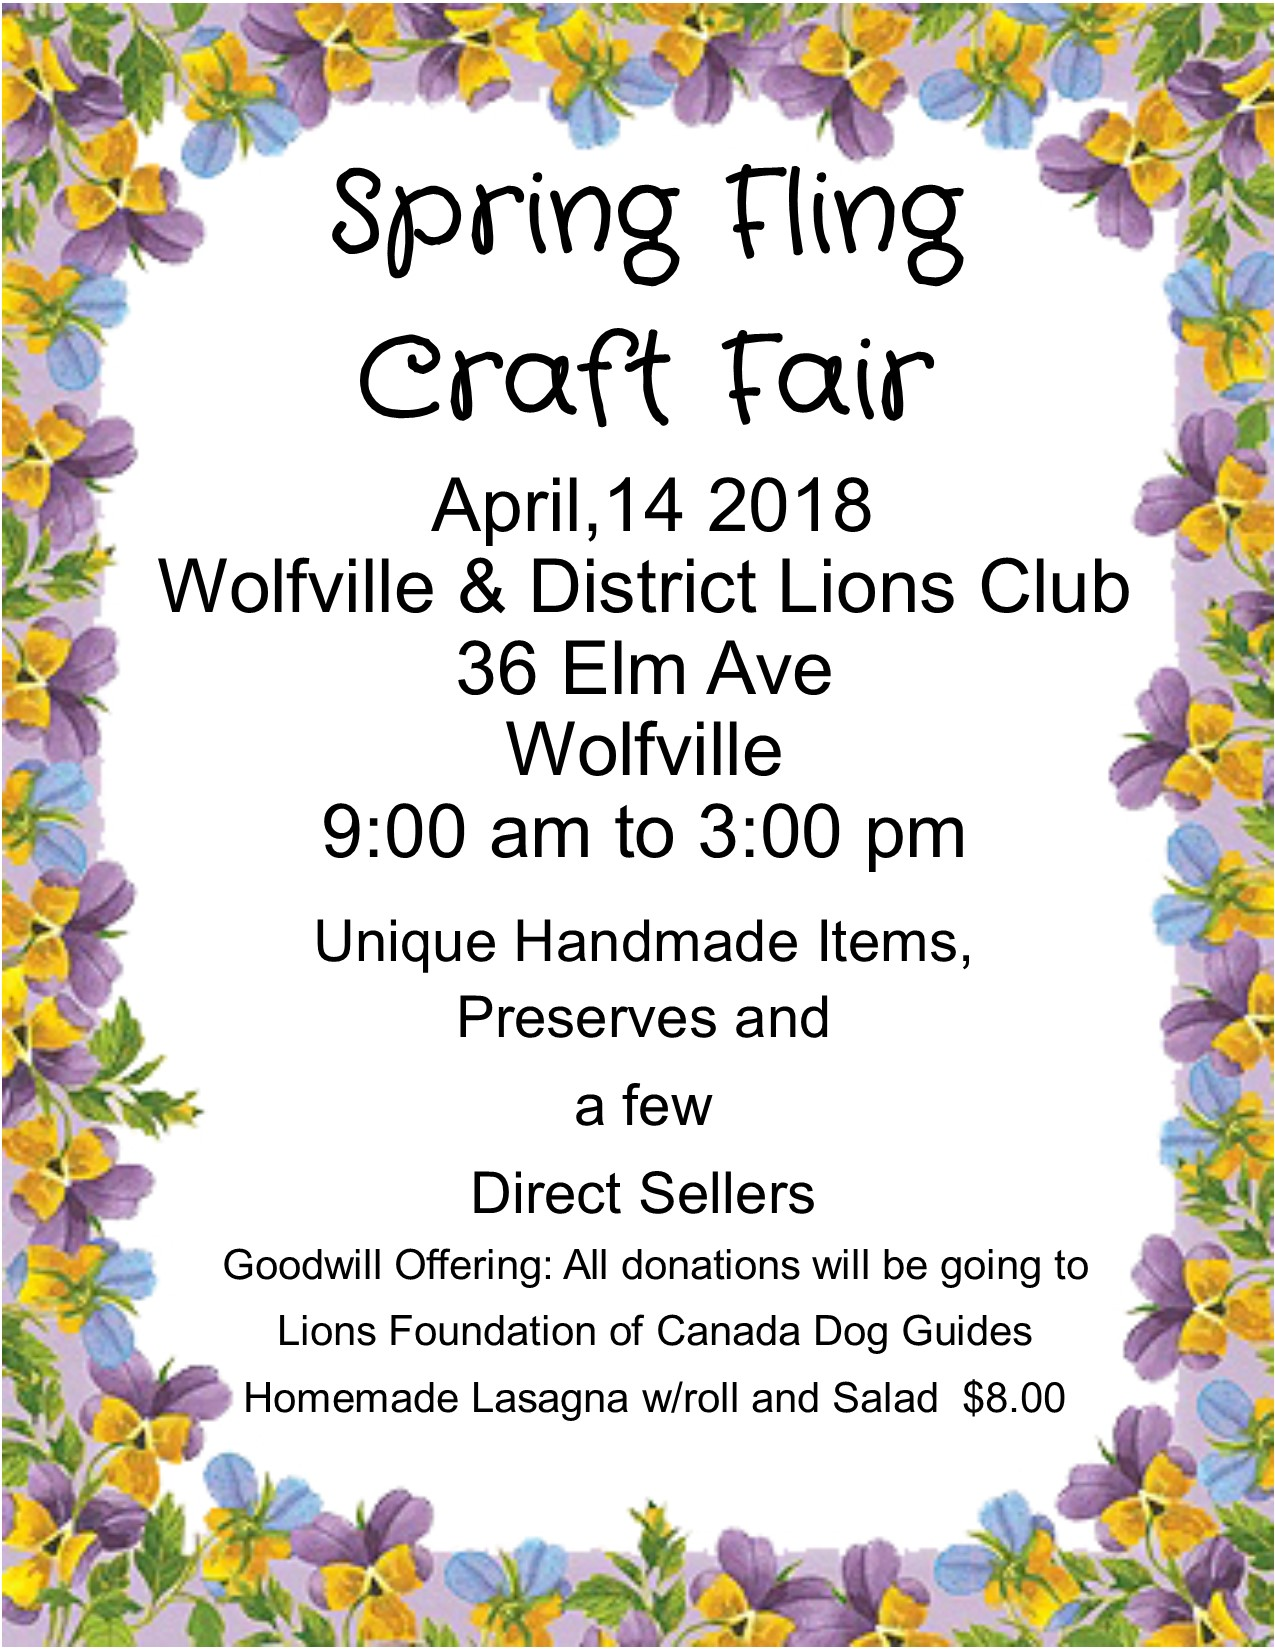 Spring Fling Craft Fair at Lions Club, Wolfville (April 14, 2018 9am)